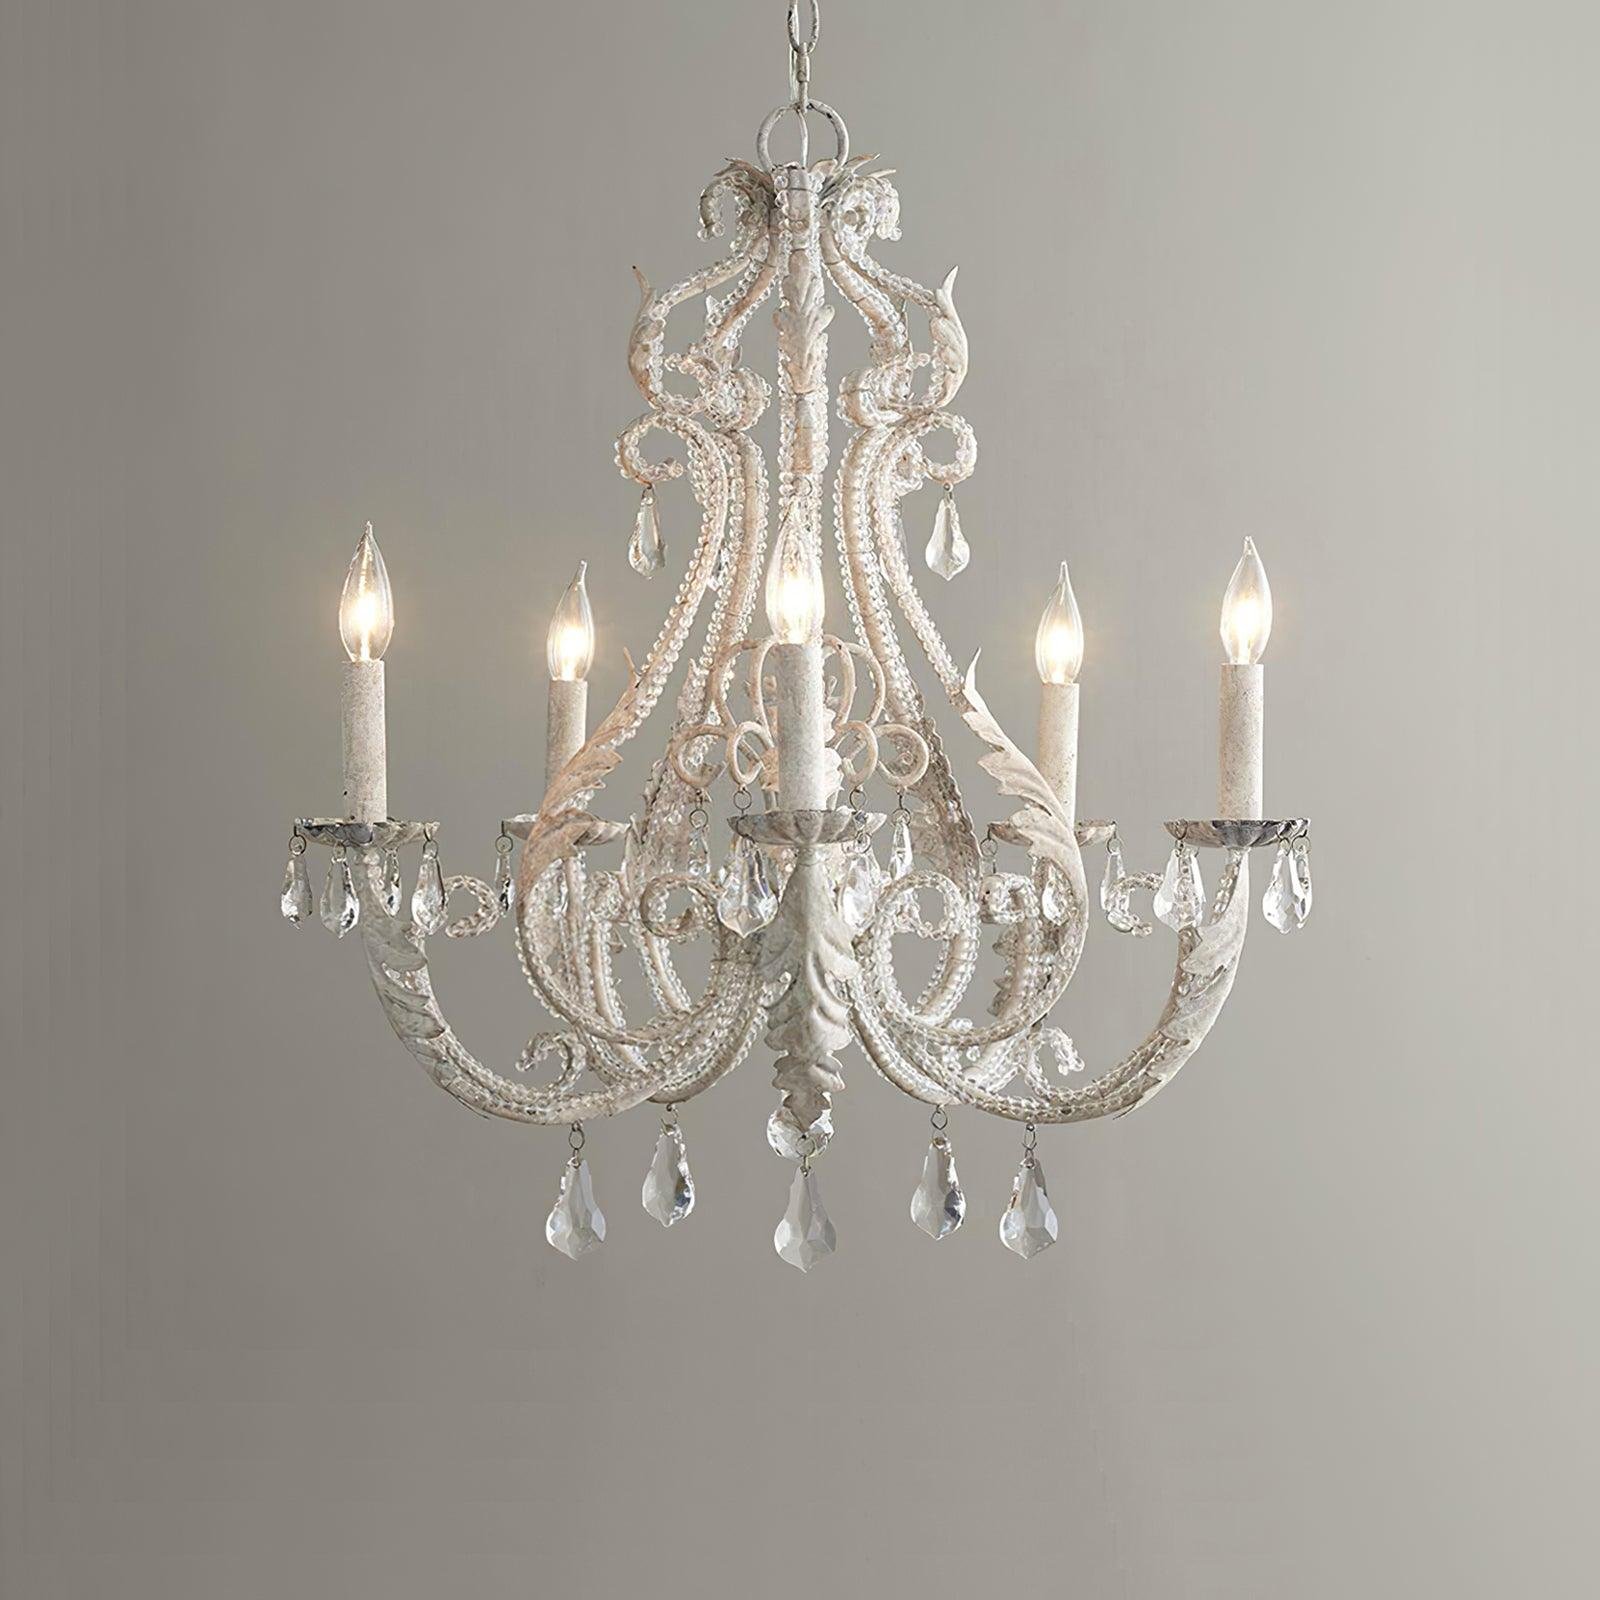 Floral Crystal Candle Chandelier 5 heads Φ 25.2″ x H 26.5″ , Dia 64cm x H 70cm , Old white